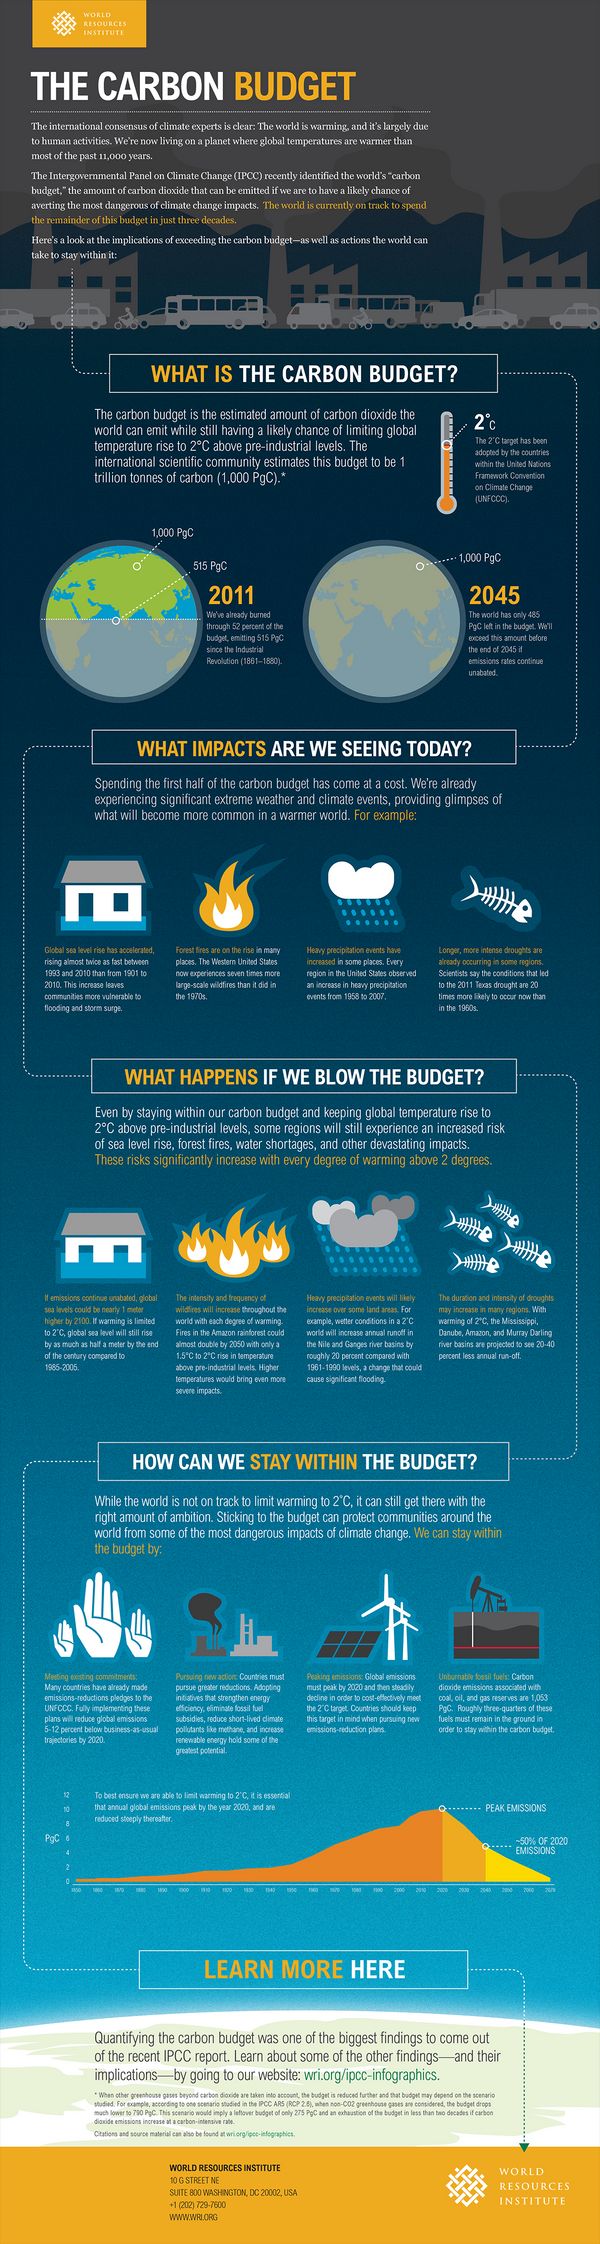 The Carbon Budget Infographic